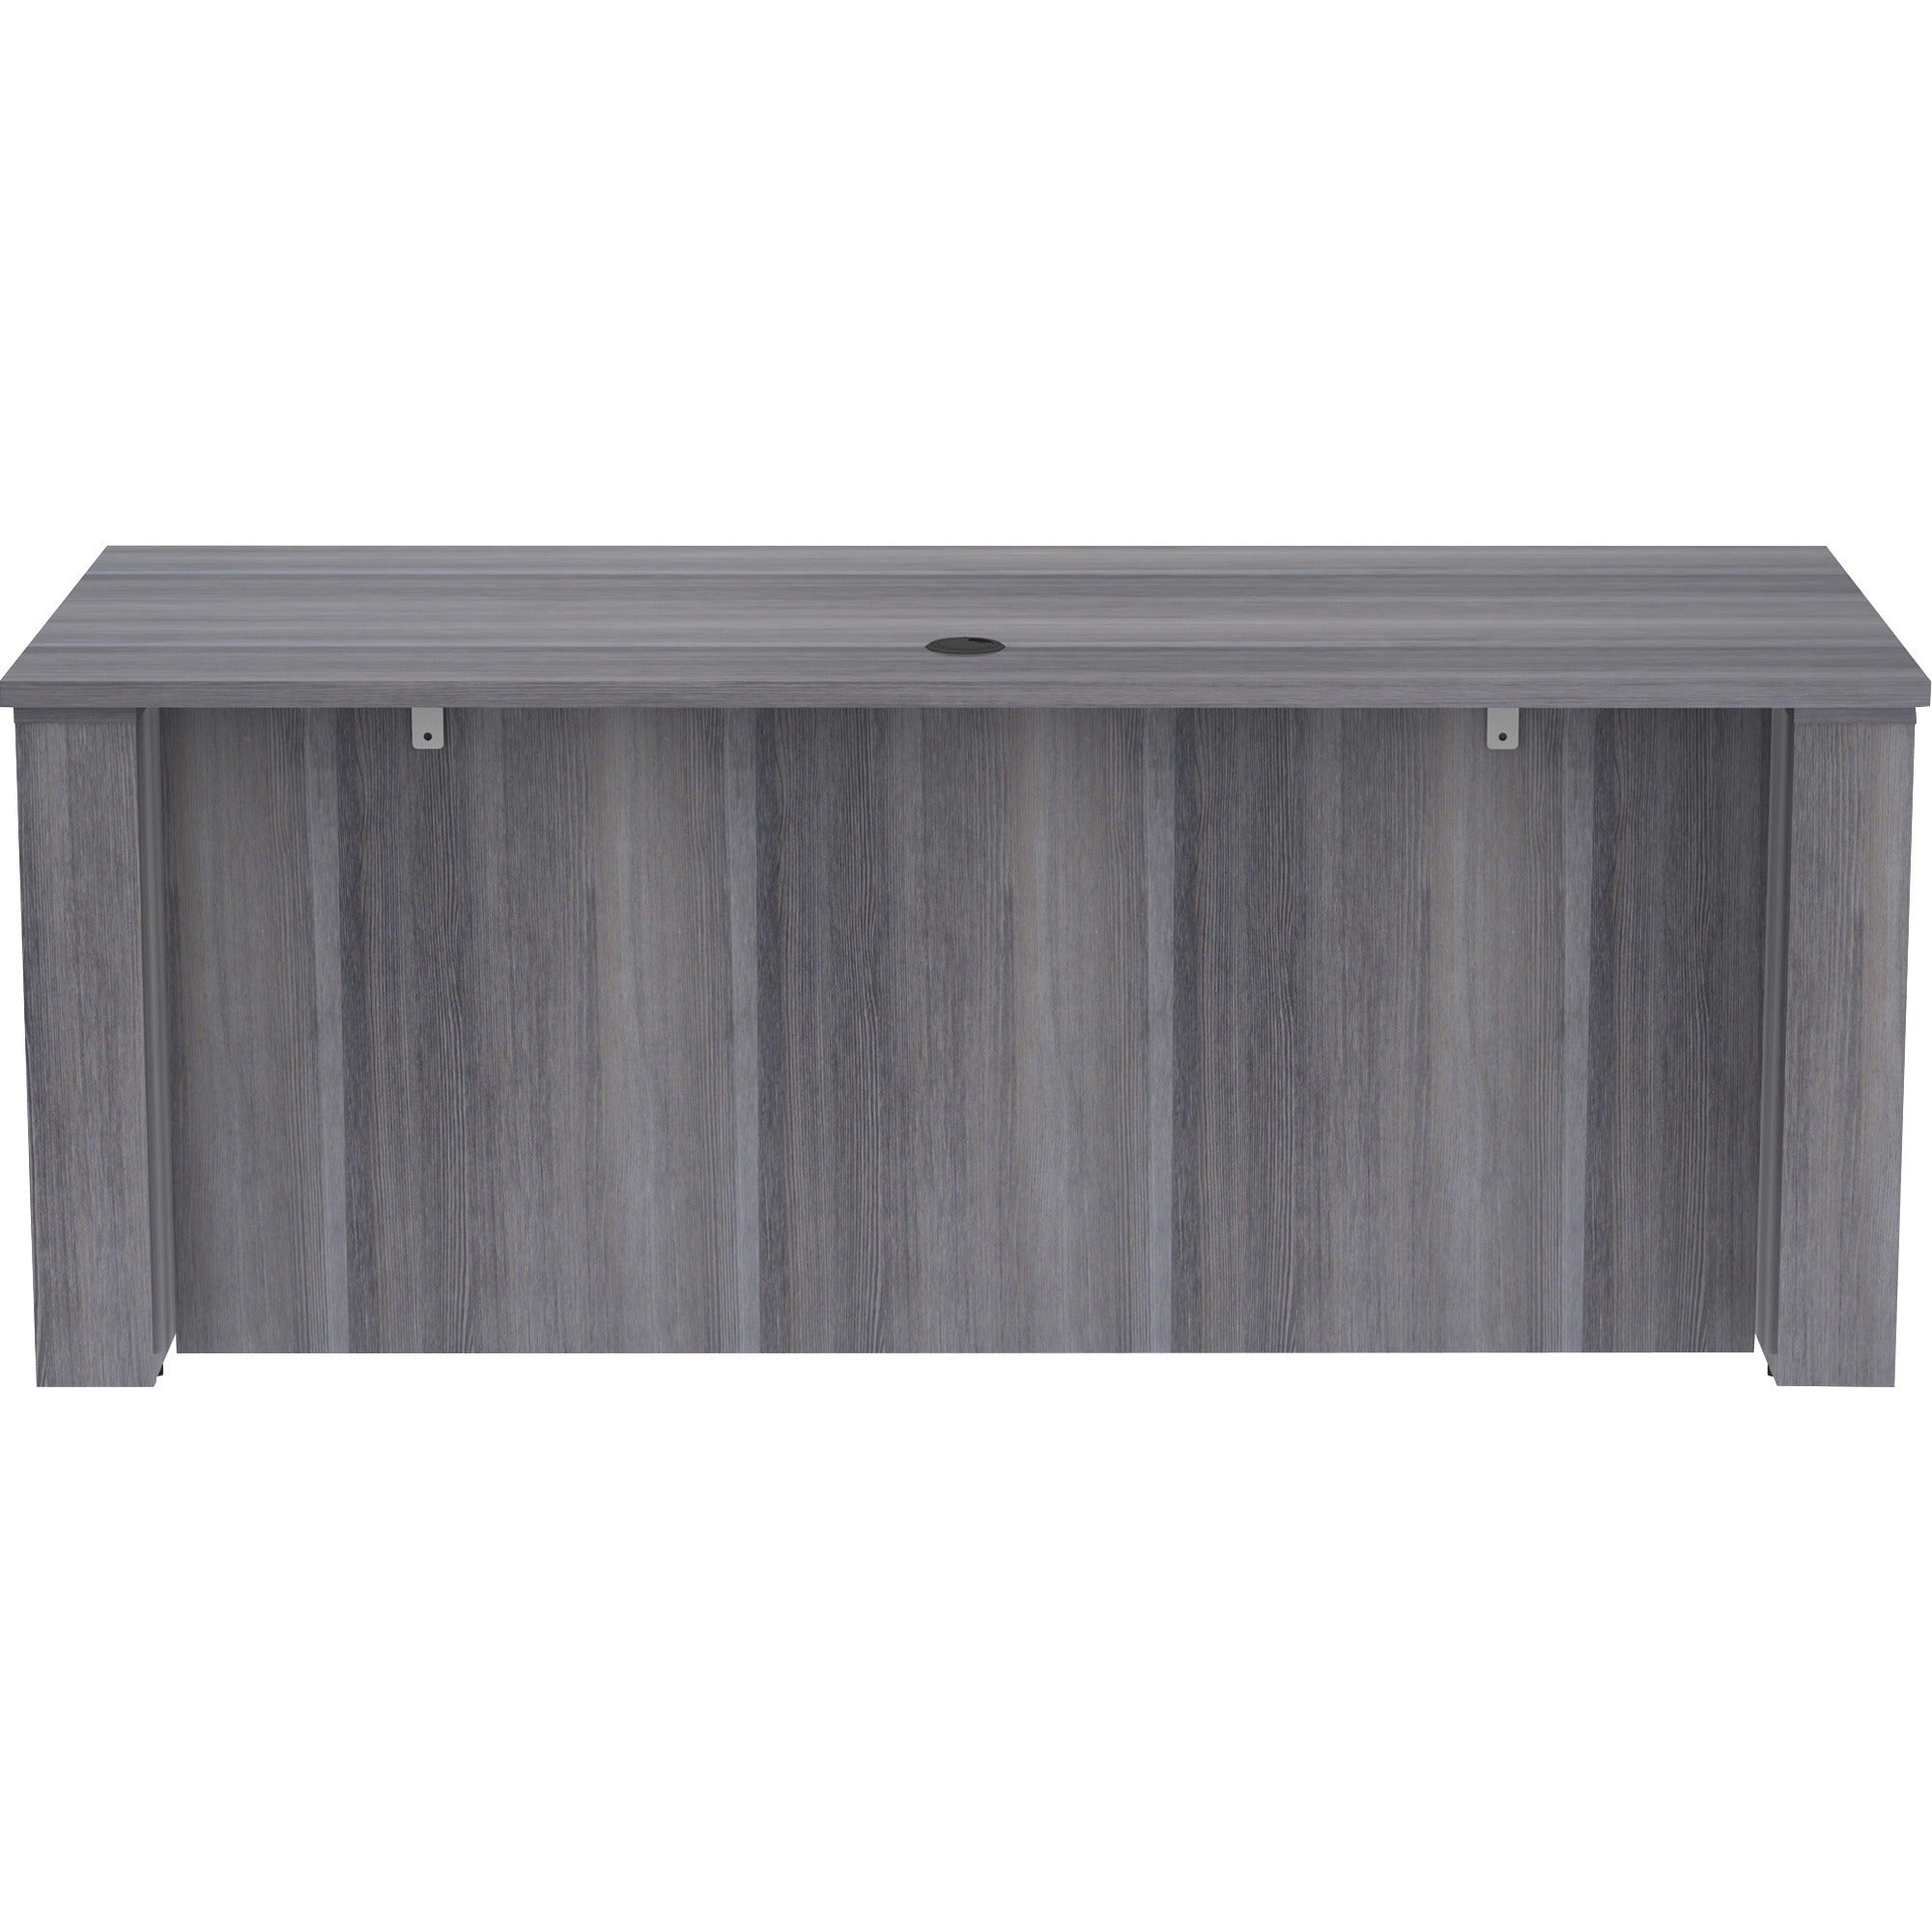 lorell-essentials-series-sit-to-stand-desk-shell-01-top-1-edge-72-x-2949-finish-weathered-charcoal-laminate-table-top_llr69578 - 4